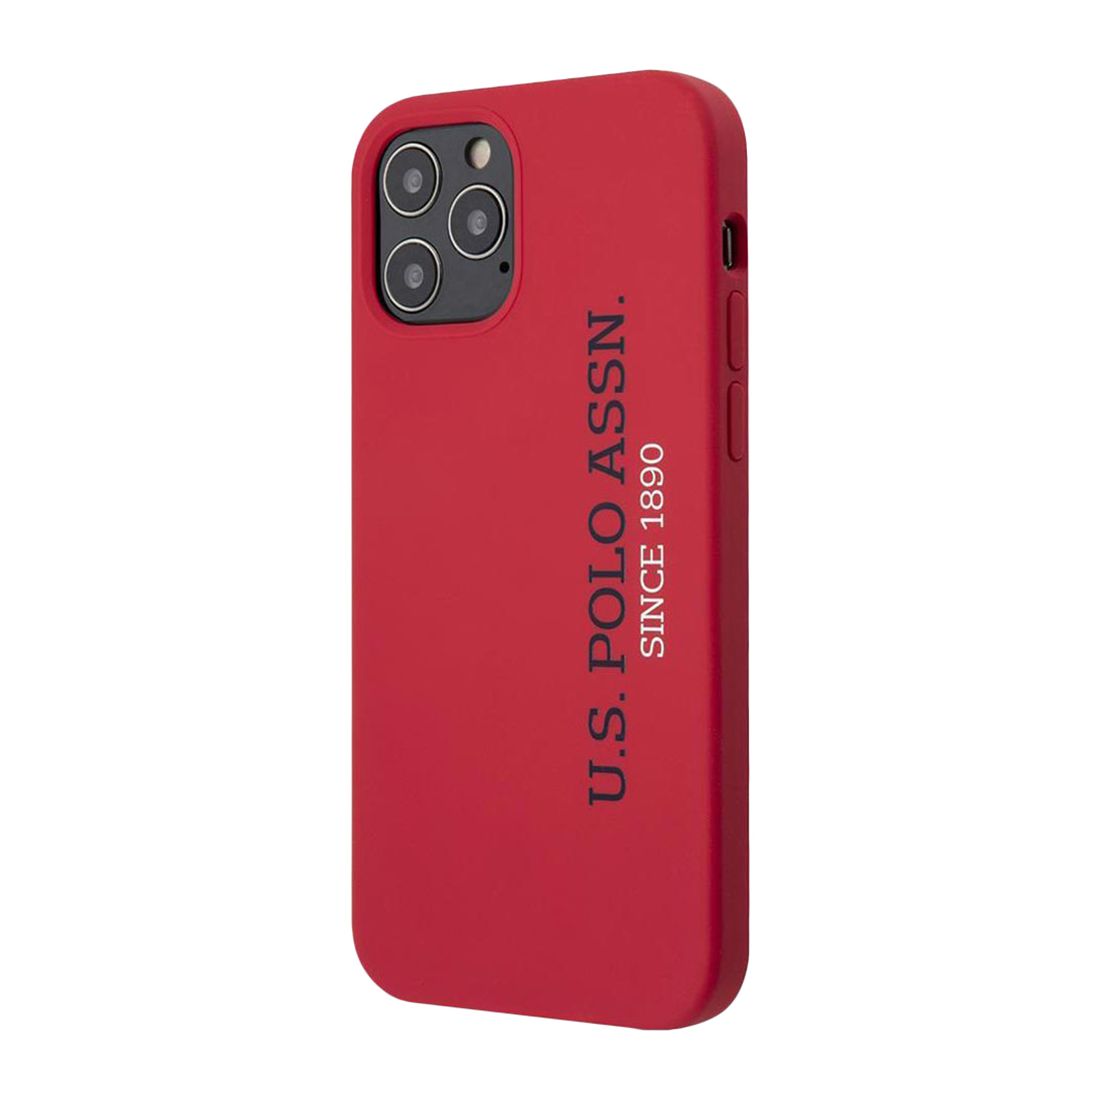 US Polo Assn Liquid Silicone Hard Case Vertical Logo Red for iPhone 12 Pro Max